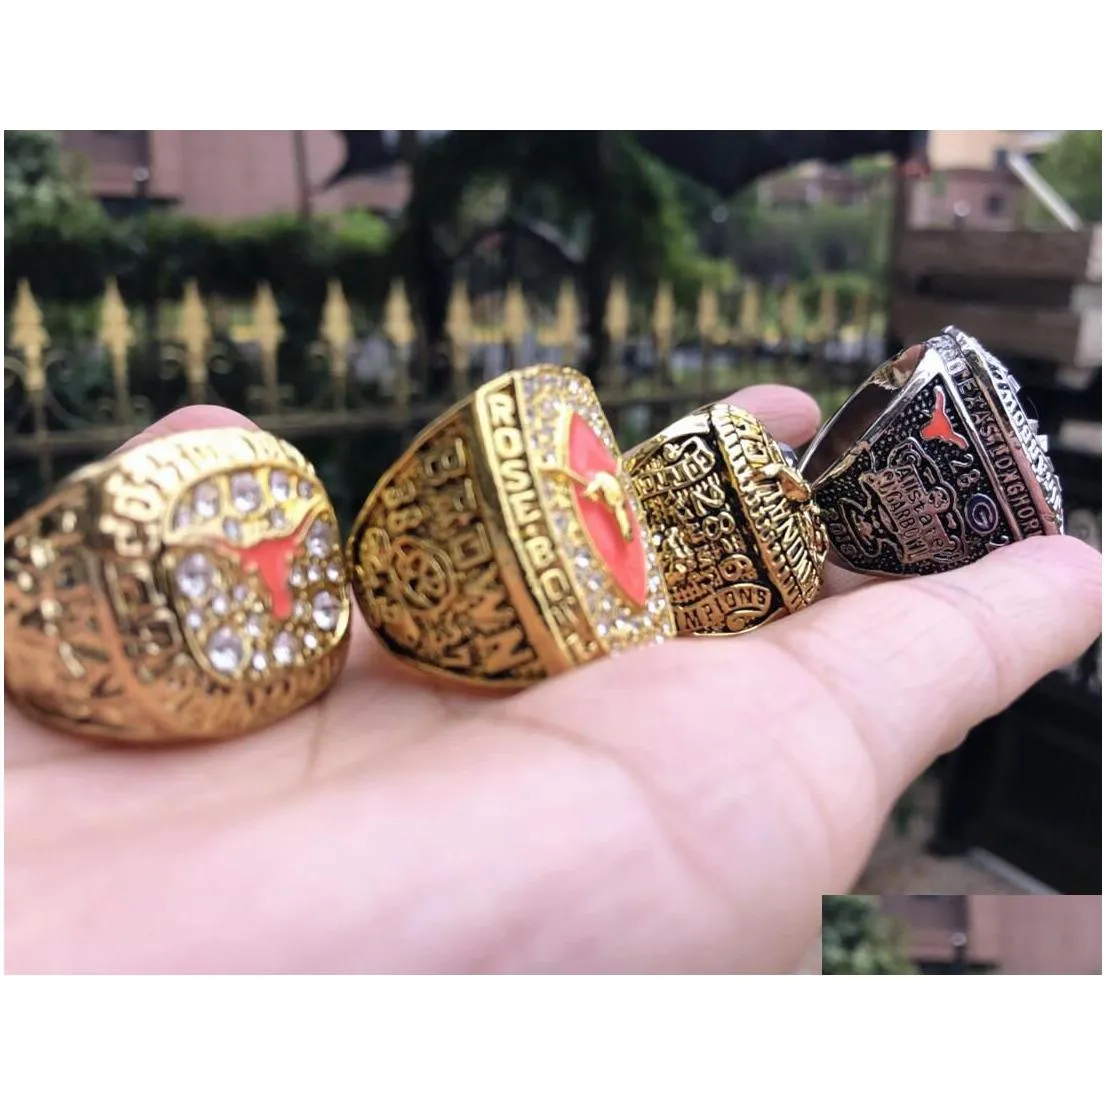 4pcs texas longhorn rose bowl sec team champions championship ring with wooden box men fan gift 2020 wholesale drop shipping